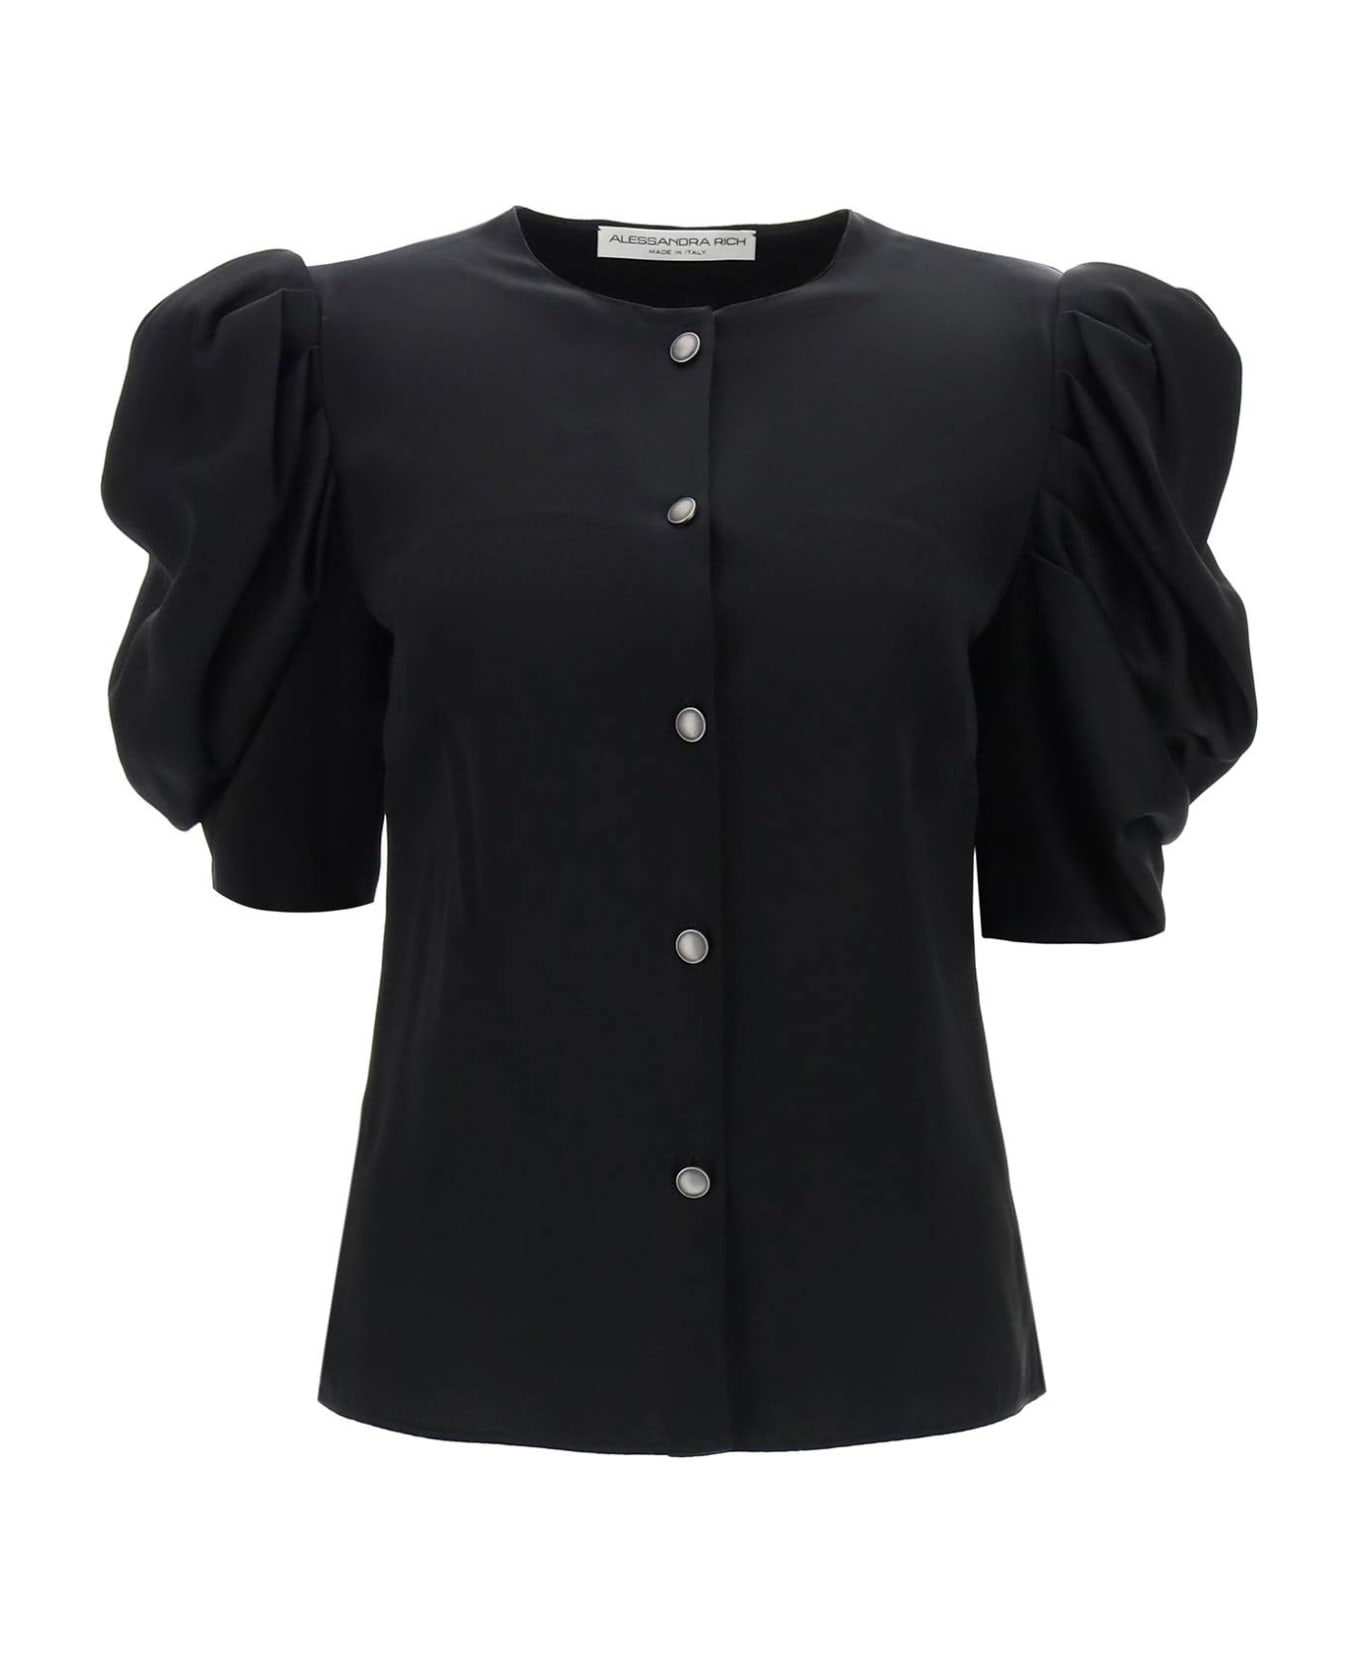 Alessandra Rich Envers Satin Blouse With Bouffant Sleeves - BLACK (Black) ブラウス